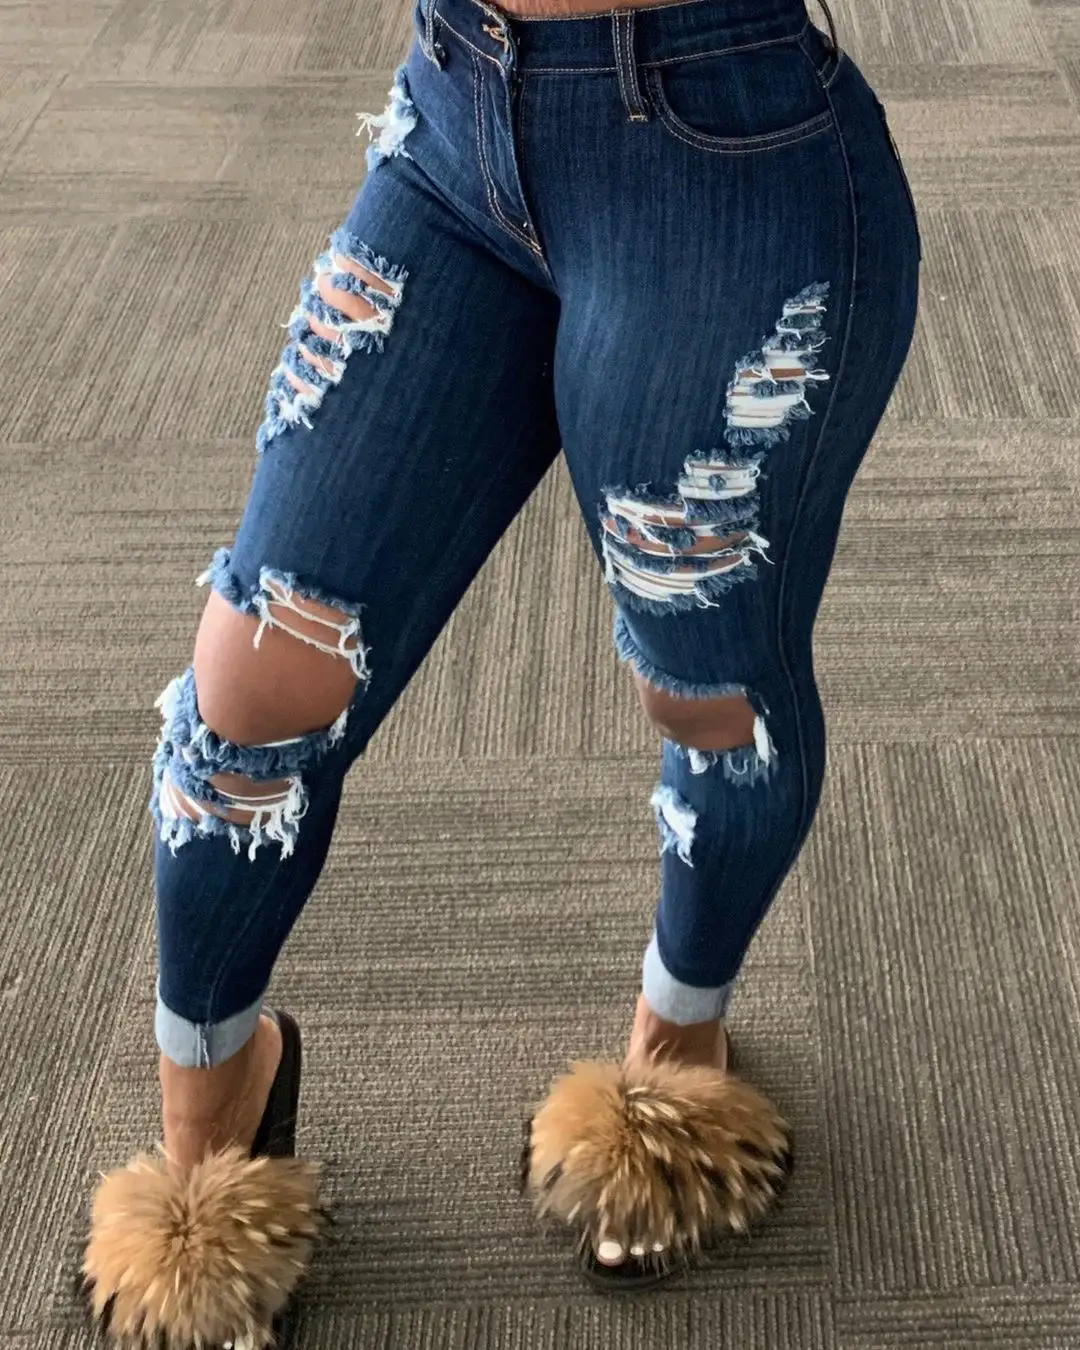 2021 new Wholesale Casual Women Jeans Denim Pant Ladies Skinny High Waist Jeans With Best Quality